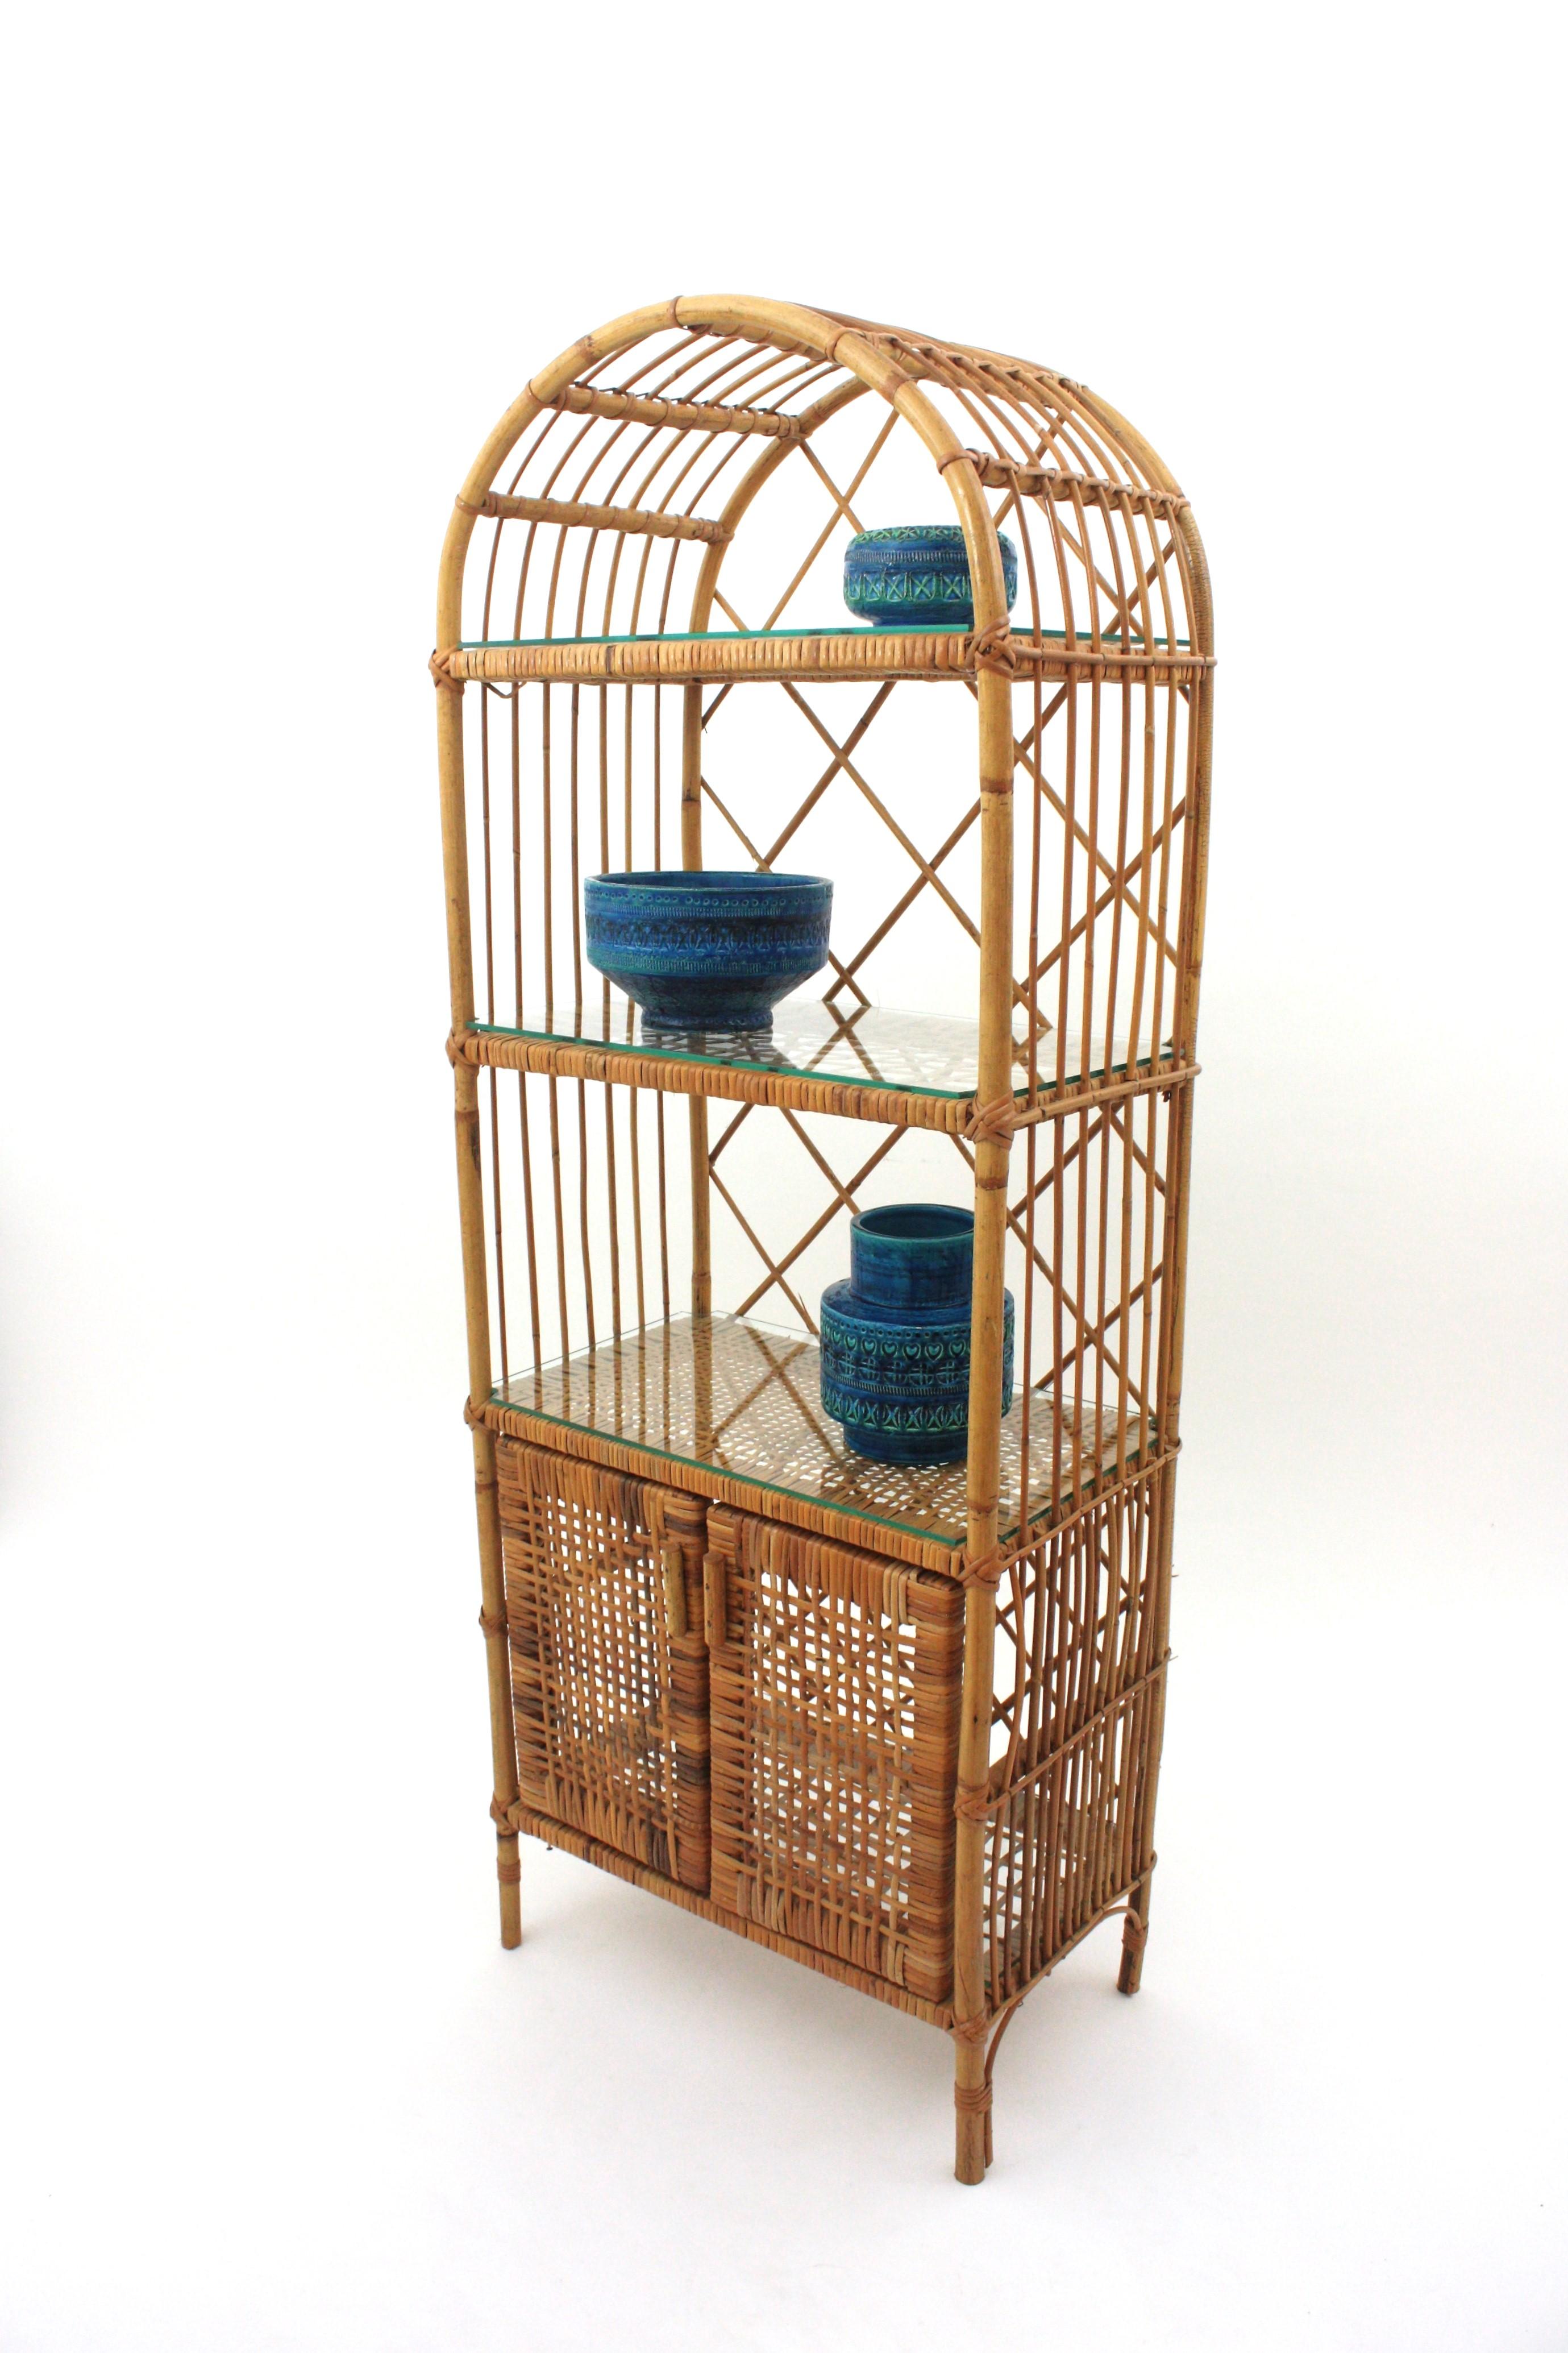 Eye-catching Rattan Storage Tall Cabinet or Bookcase / Bookshelf, Spain, 1960s
This rattan cabinet features a rattan structure with woven wicker details. Round top and Four Levels: three shelves and a fourth one with doors. Each level has a glass